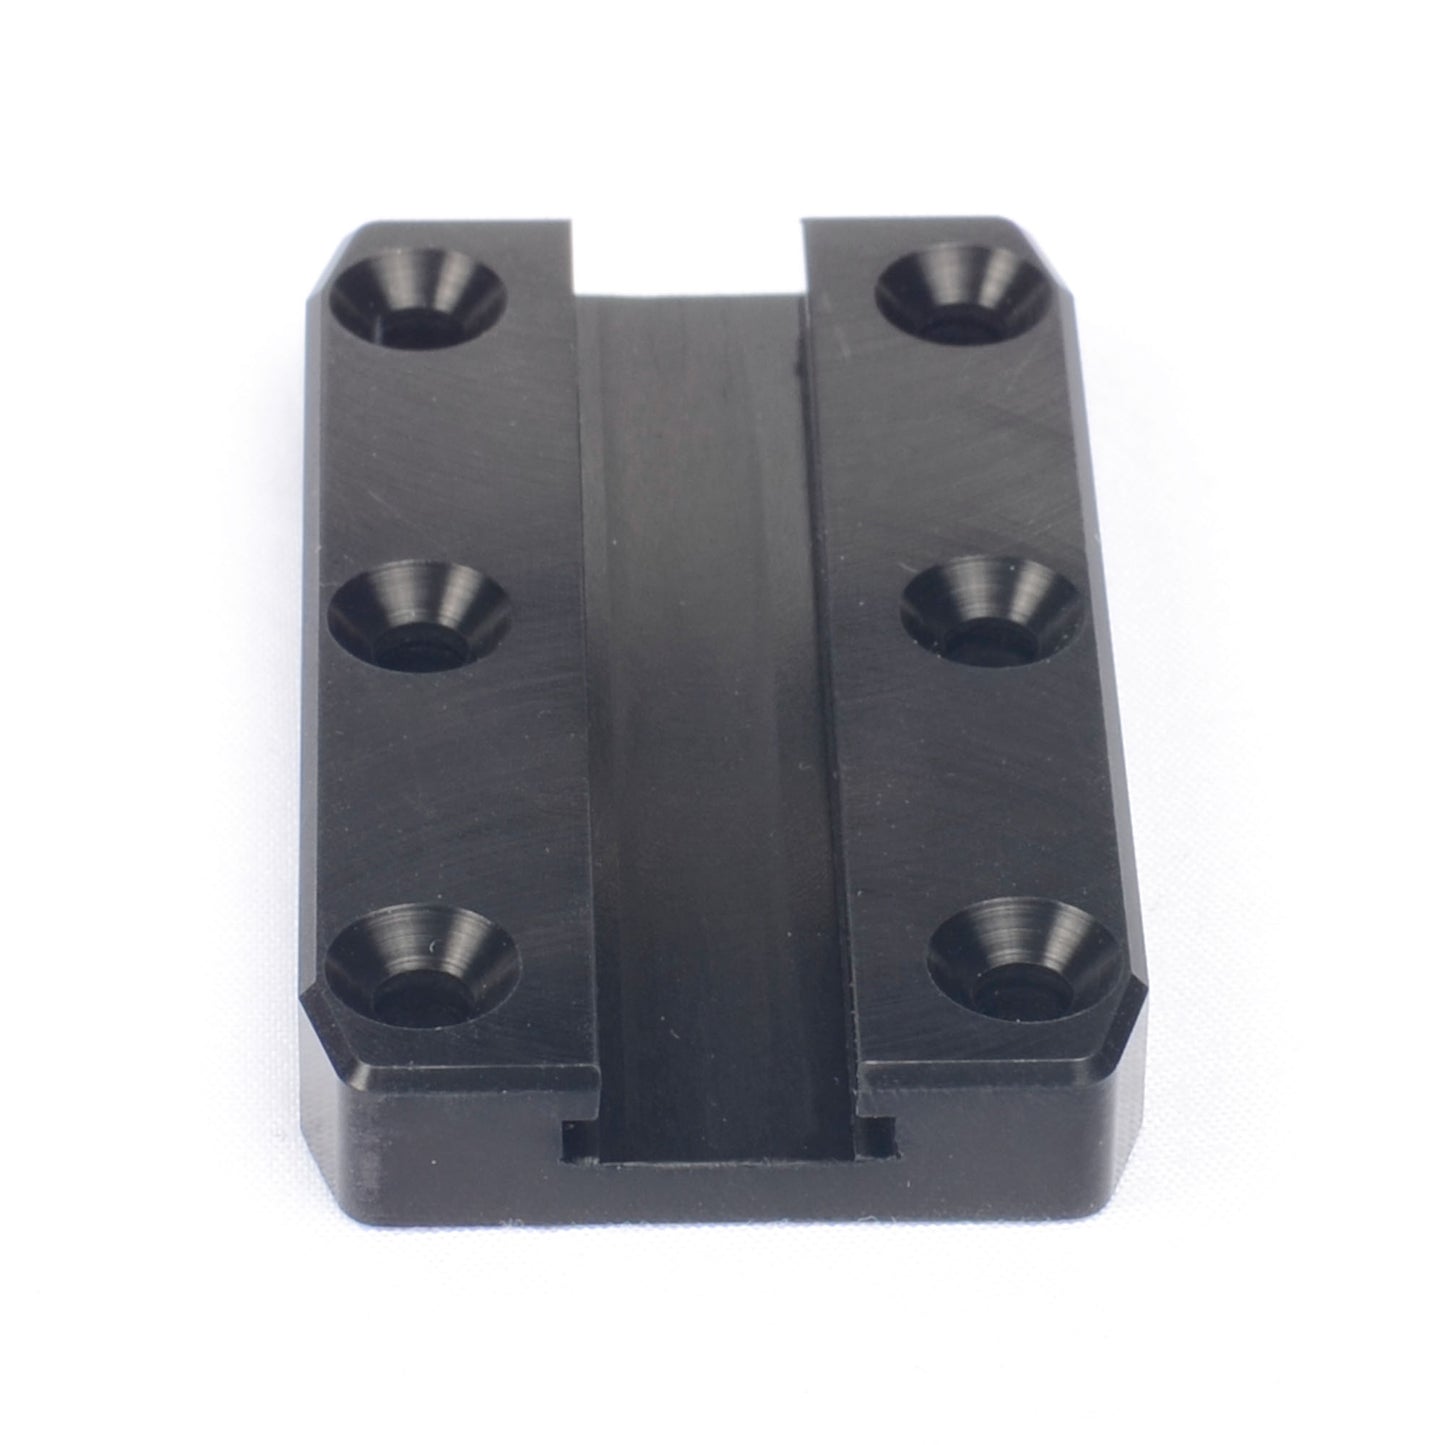 Stock Mounting Plate- T-Rail Section.